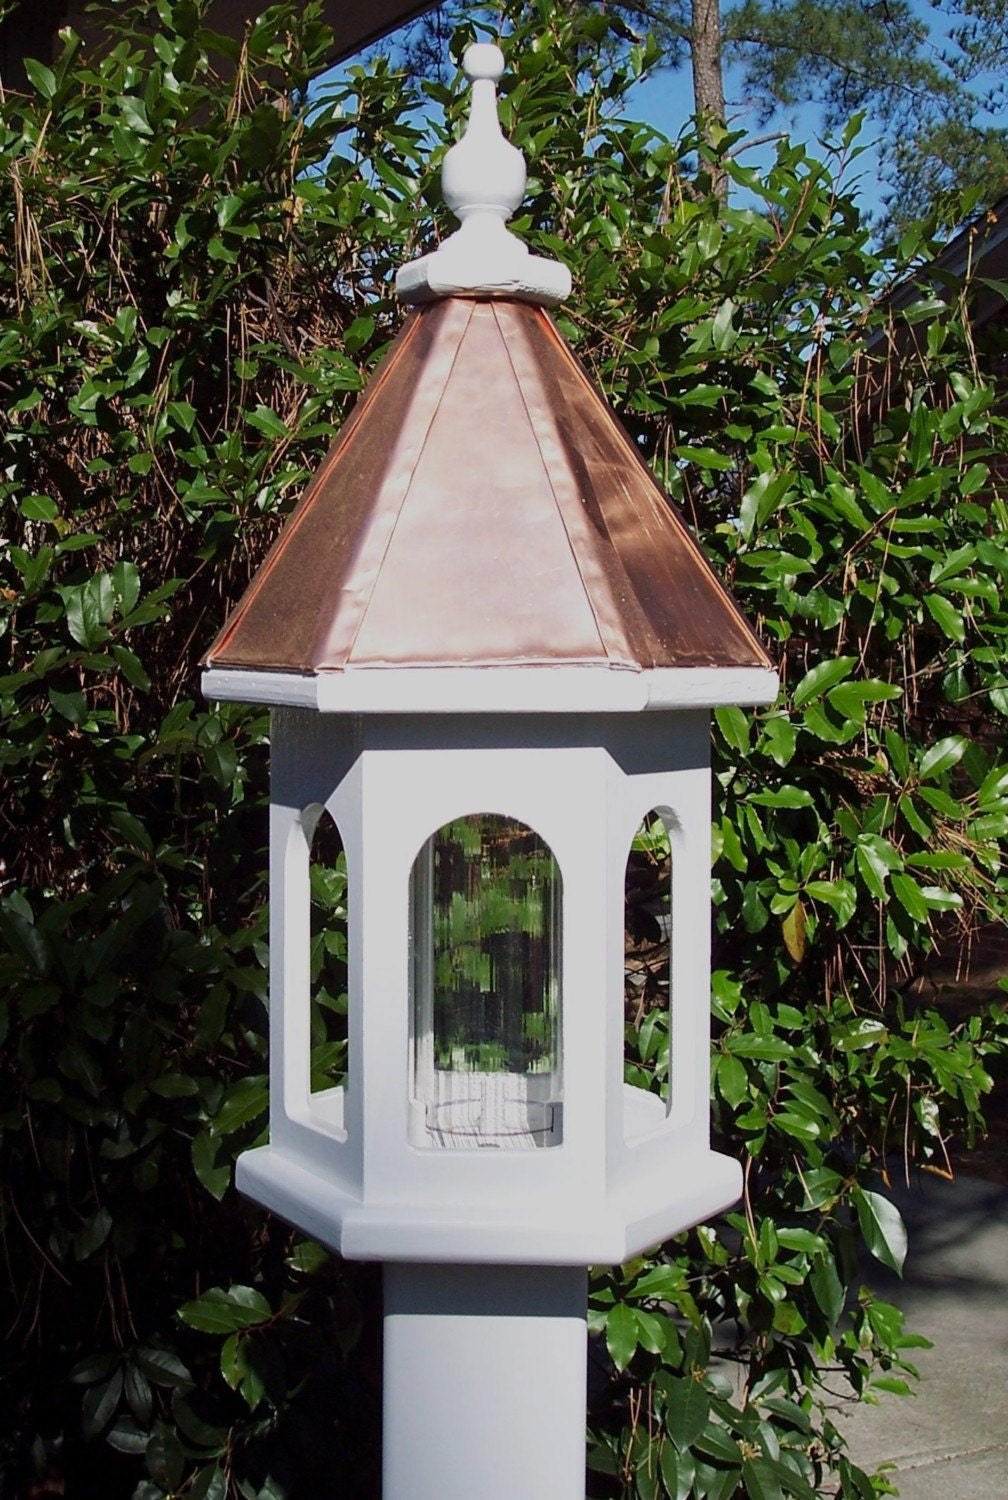 Handcrafted Wood Bird feeder with copper roof